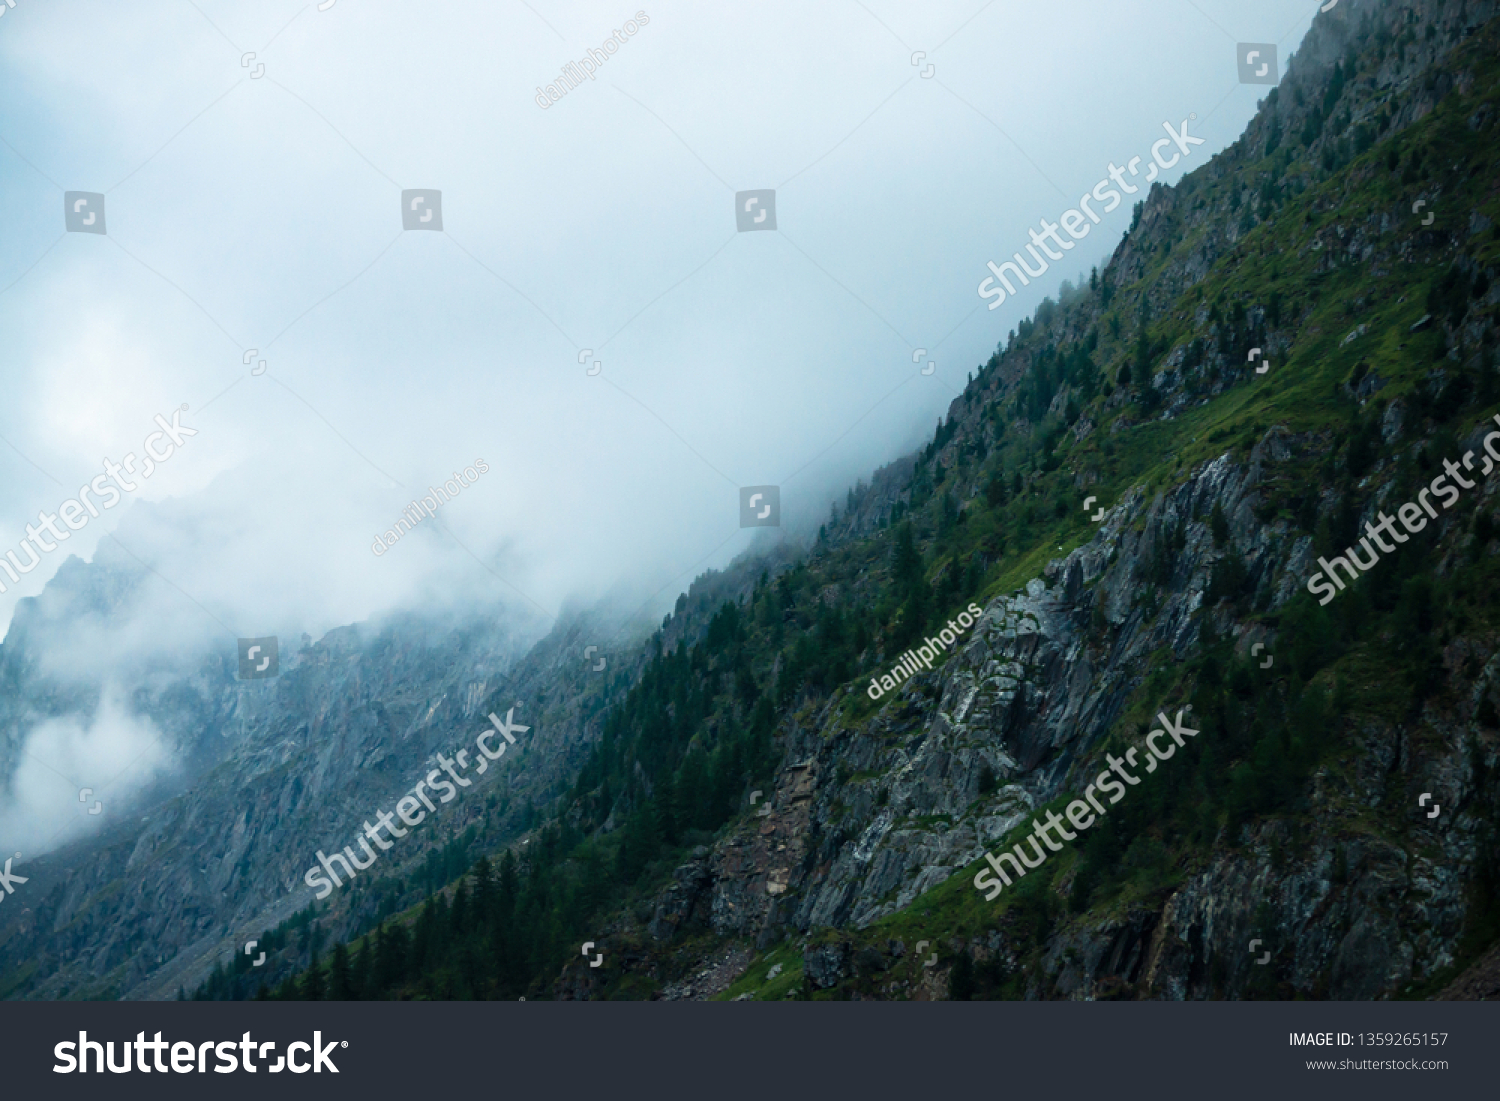 Ghostly giant rocks with trees in thick fog. Mysterious huge mountain in mist. Early morning in mountains. Impenetrable fog. Dark atmospheric eerie landscape. Tranquil mystic atmosphere of wilderness. #1359265157